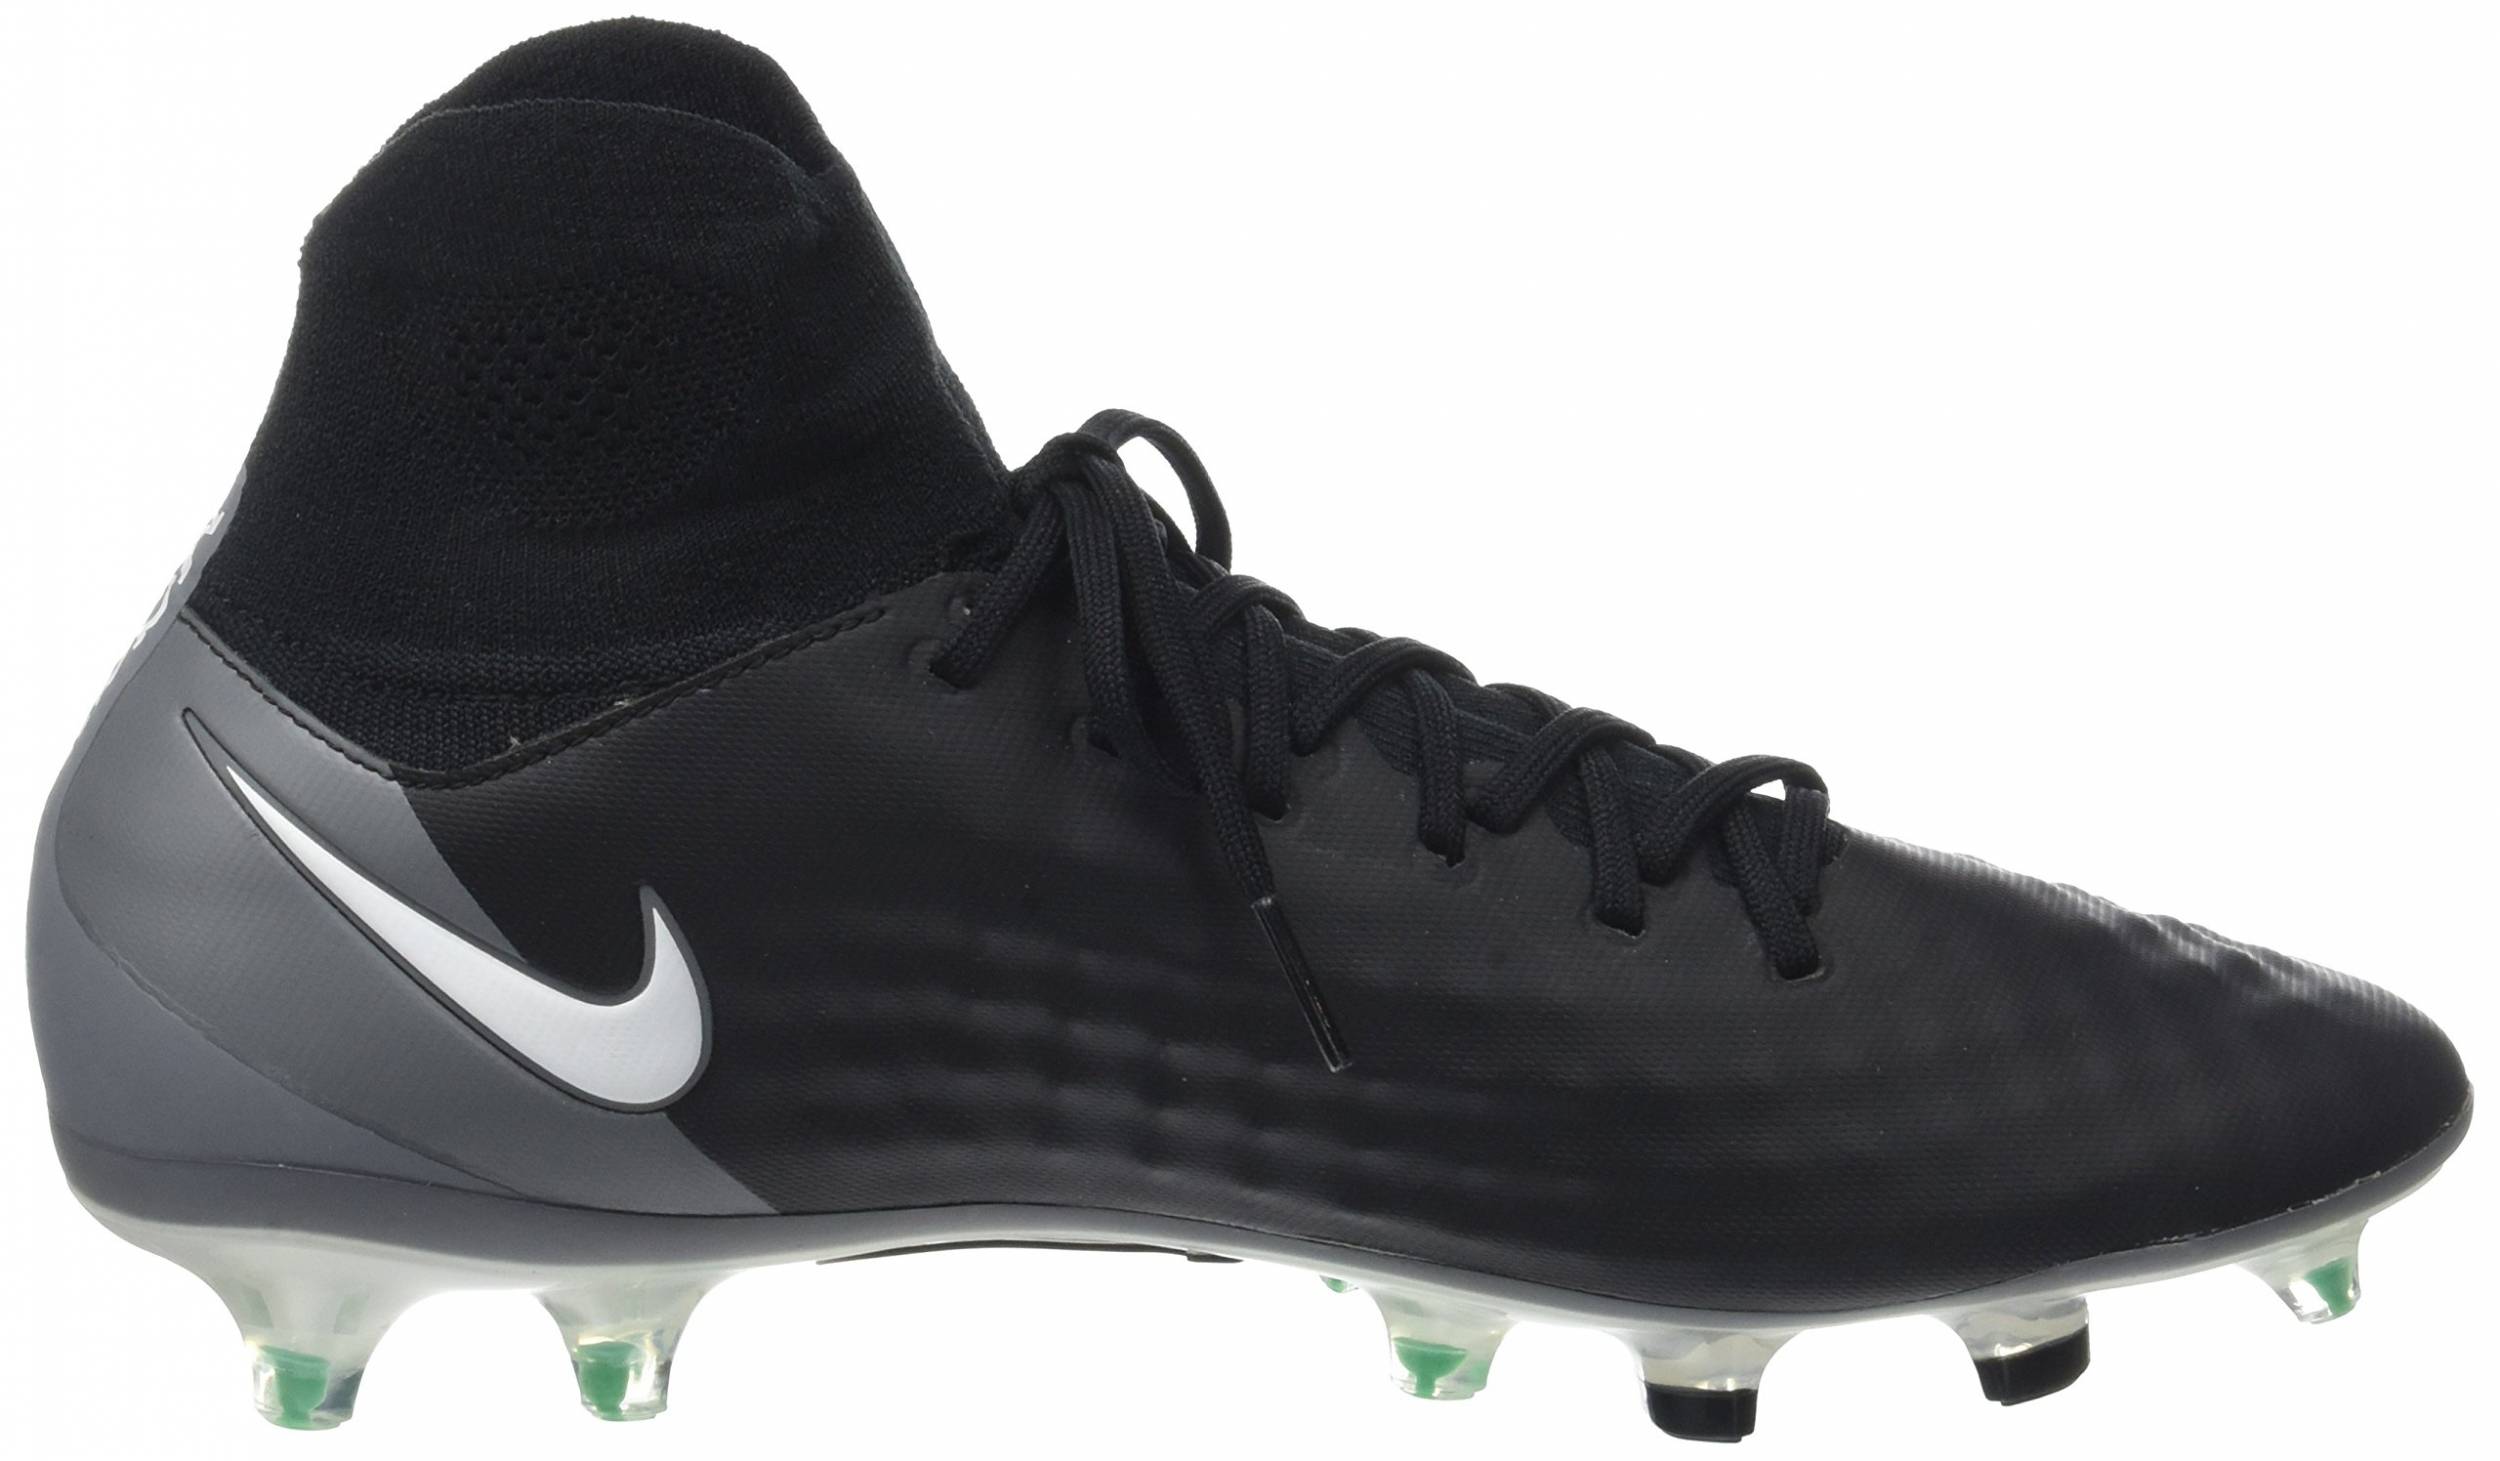 Only £70 + Review of Nike Magista Obra II DF Pro Firm Ground | RunRepeat